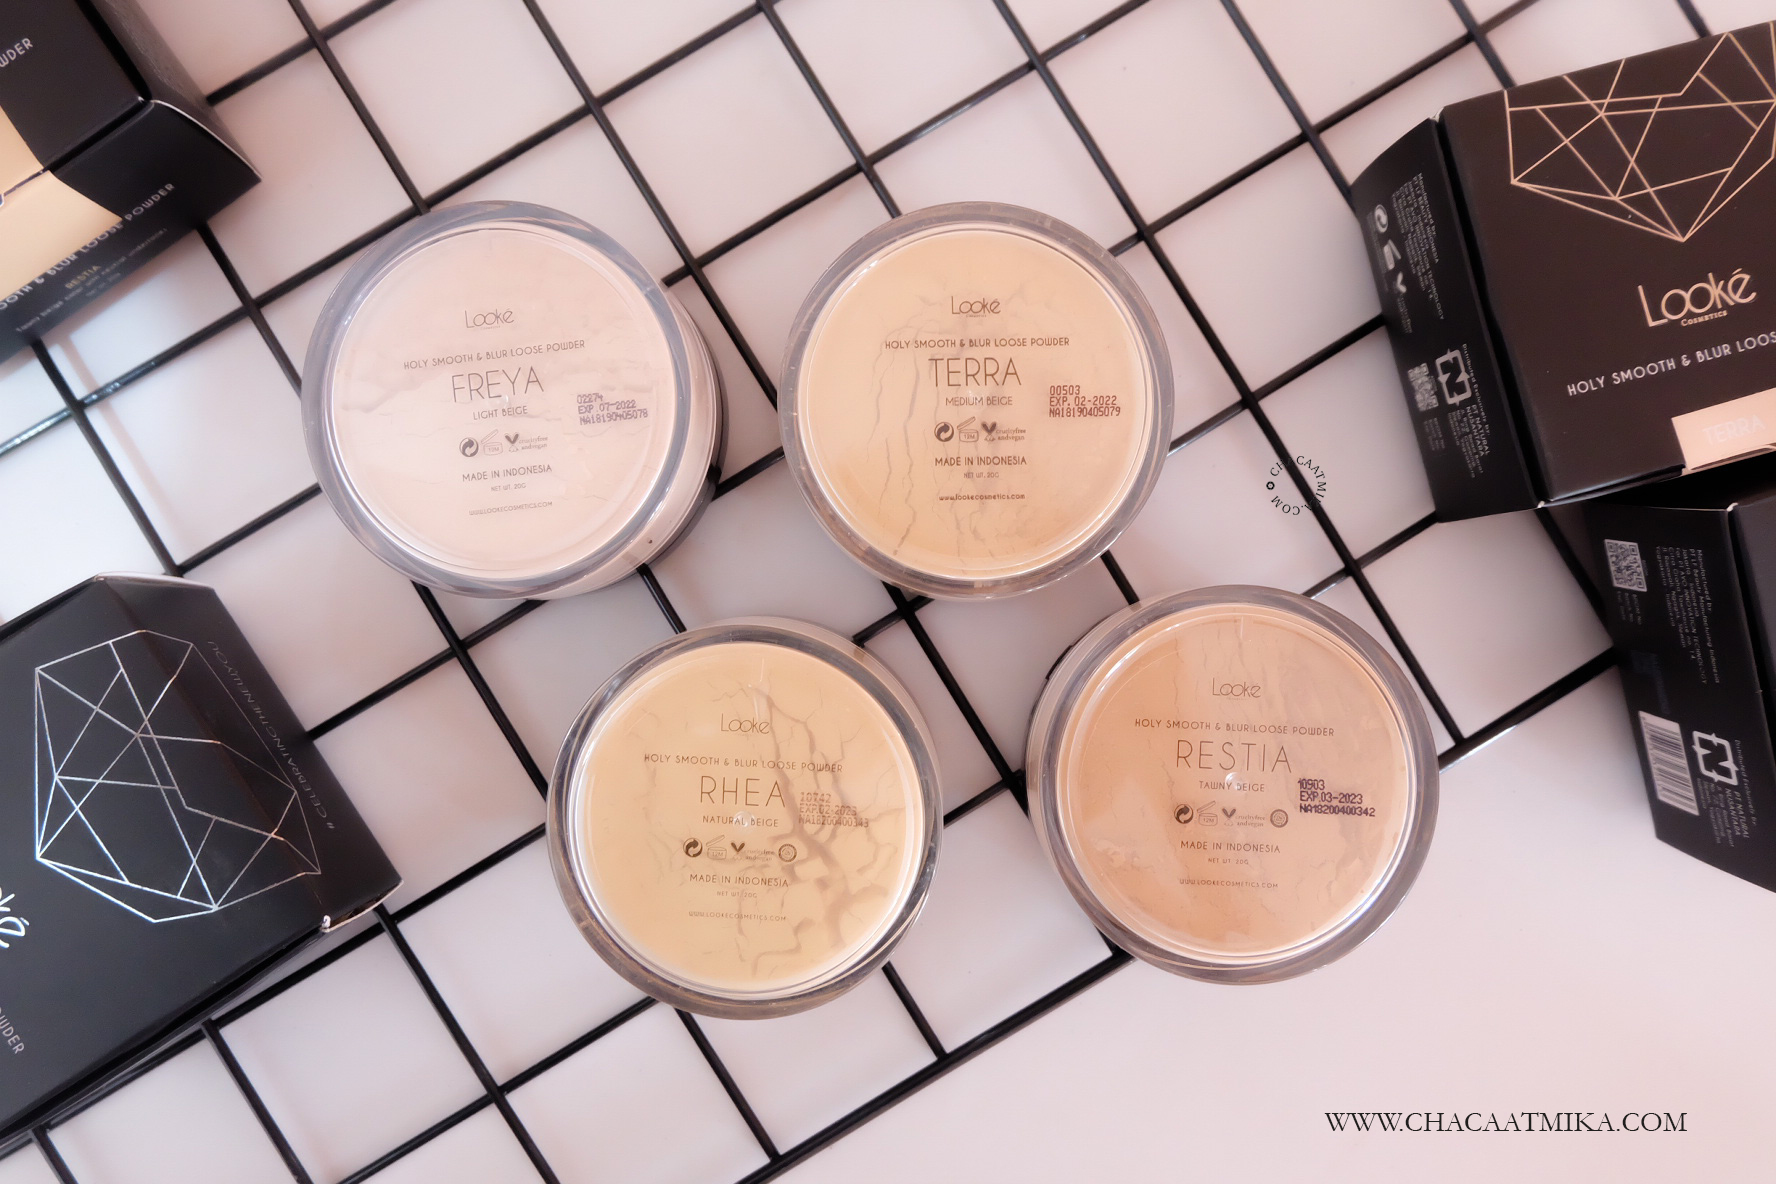 [Review] Looke Holy Smooth & Blur Loose Powder